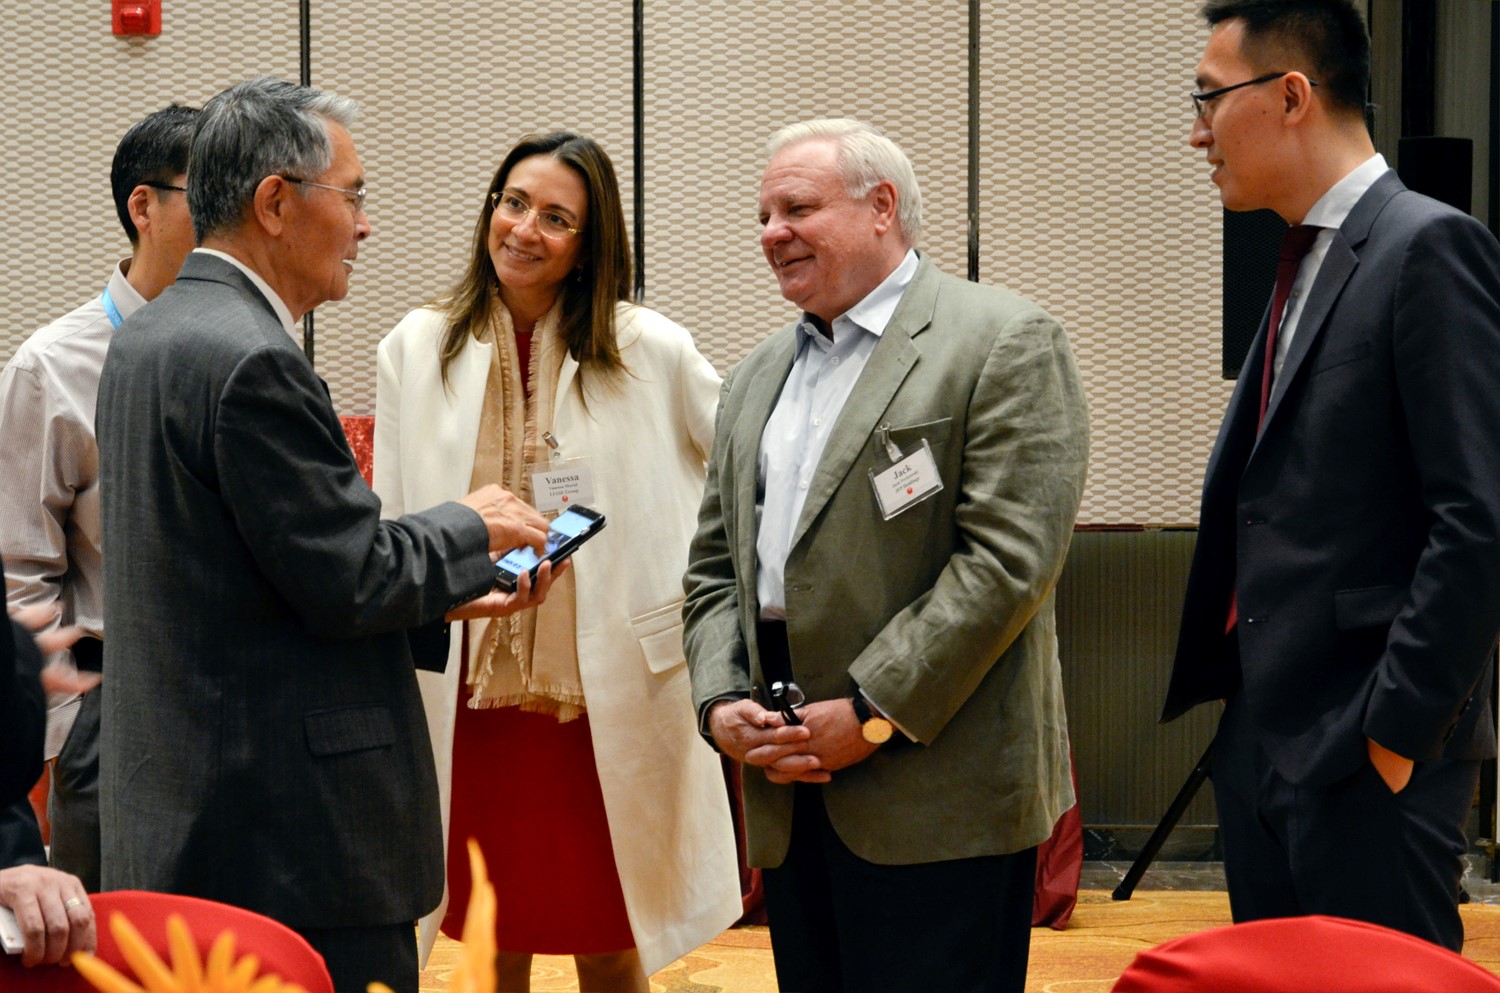 Vanessa Moriel, LIASE Group Managing Director Asia (middle left); Jack Perkowski, Managing Partner, JFP Holdings (middle right); Dr. Wang (right) and Lei Xing, Editor-in-Chief, CBU (left) at the CBU/CAR 2016 Conference.